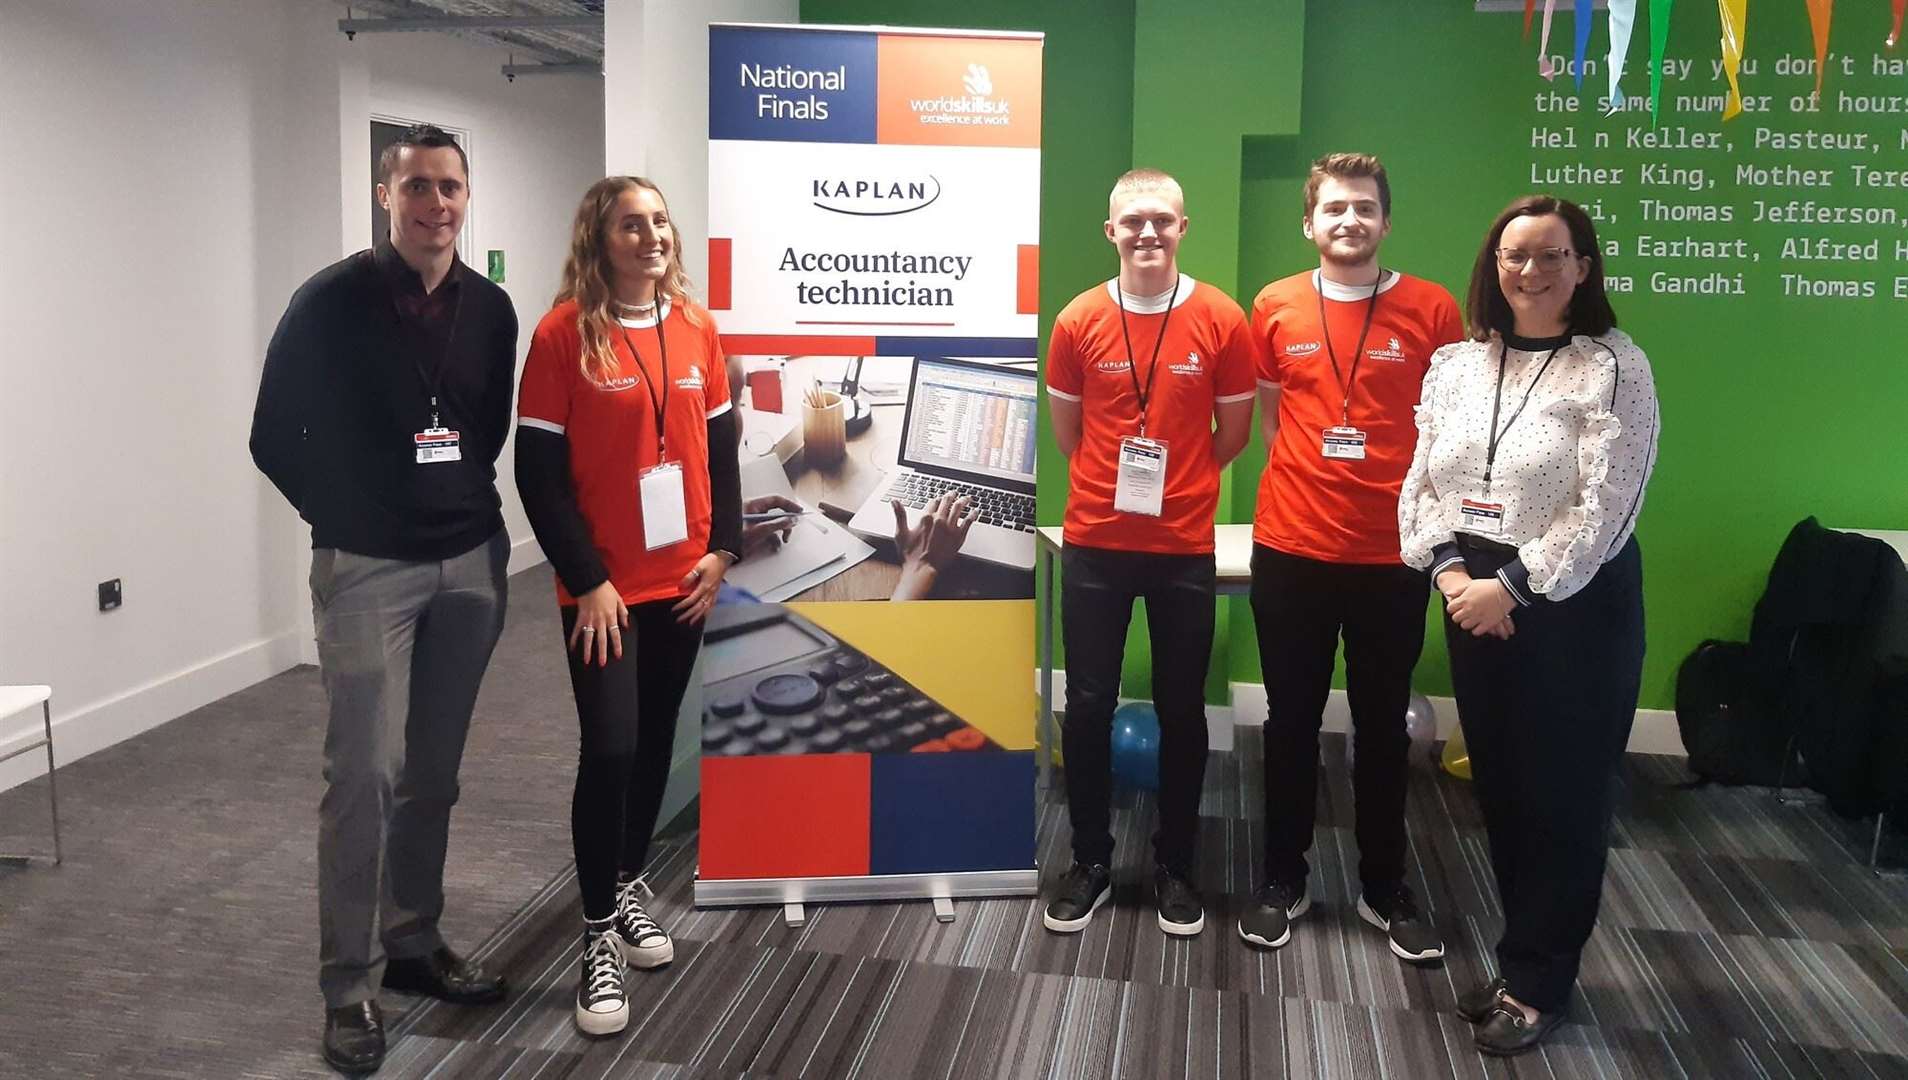 Chloe Thompson (left from centre) took part in the World Skills UK competition last November. Her team gained the ‘Silver Award for Accountancy Technician’.